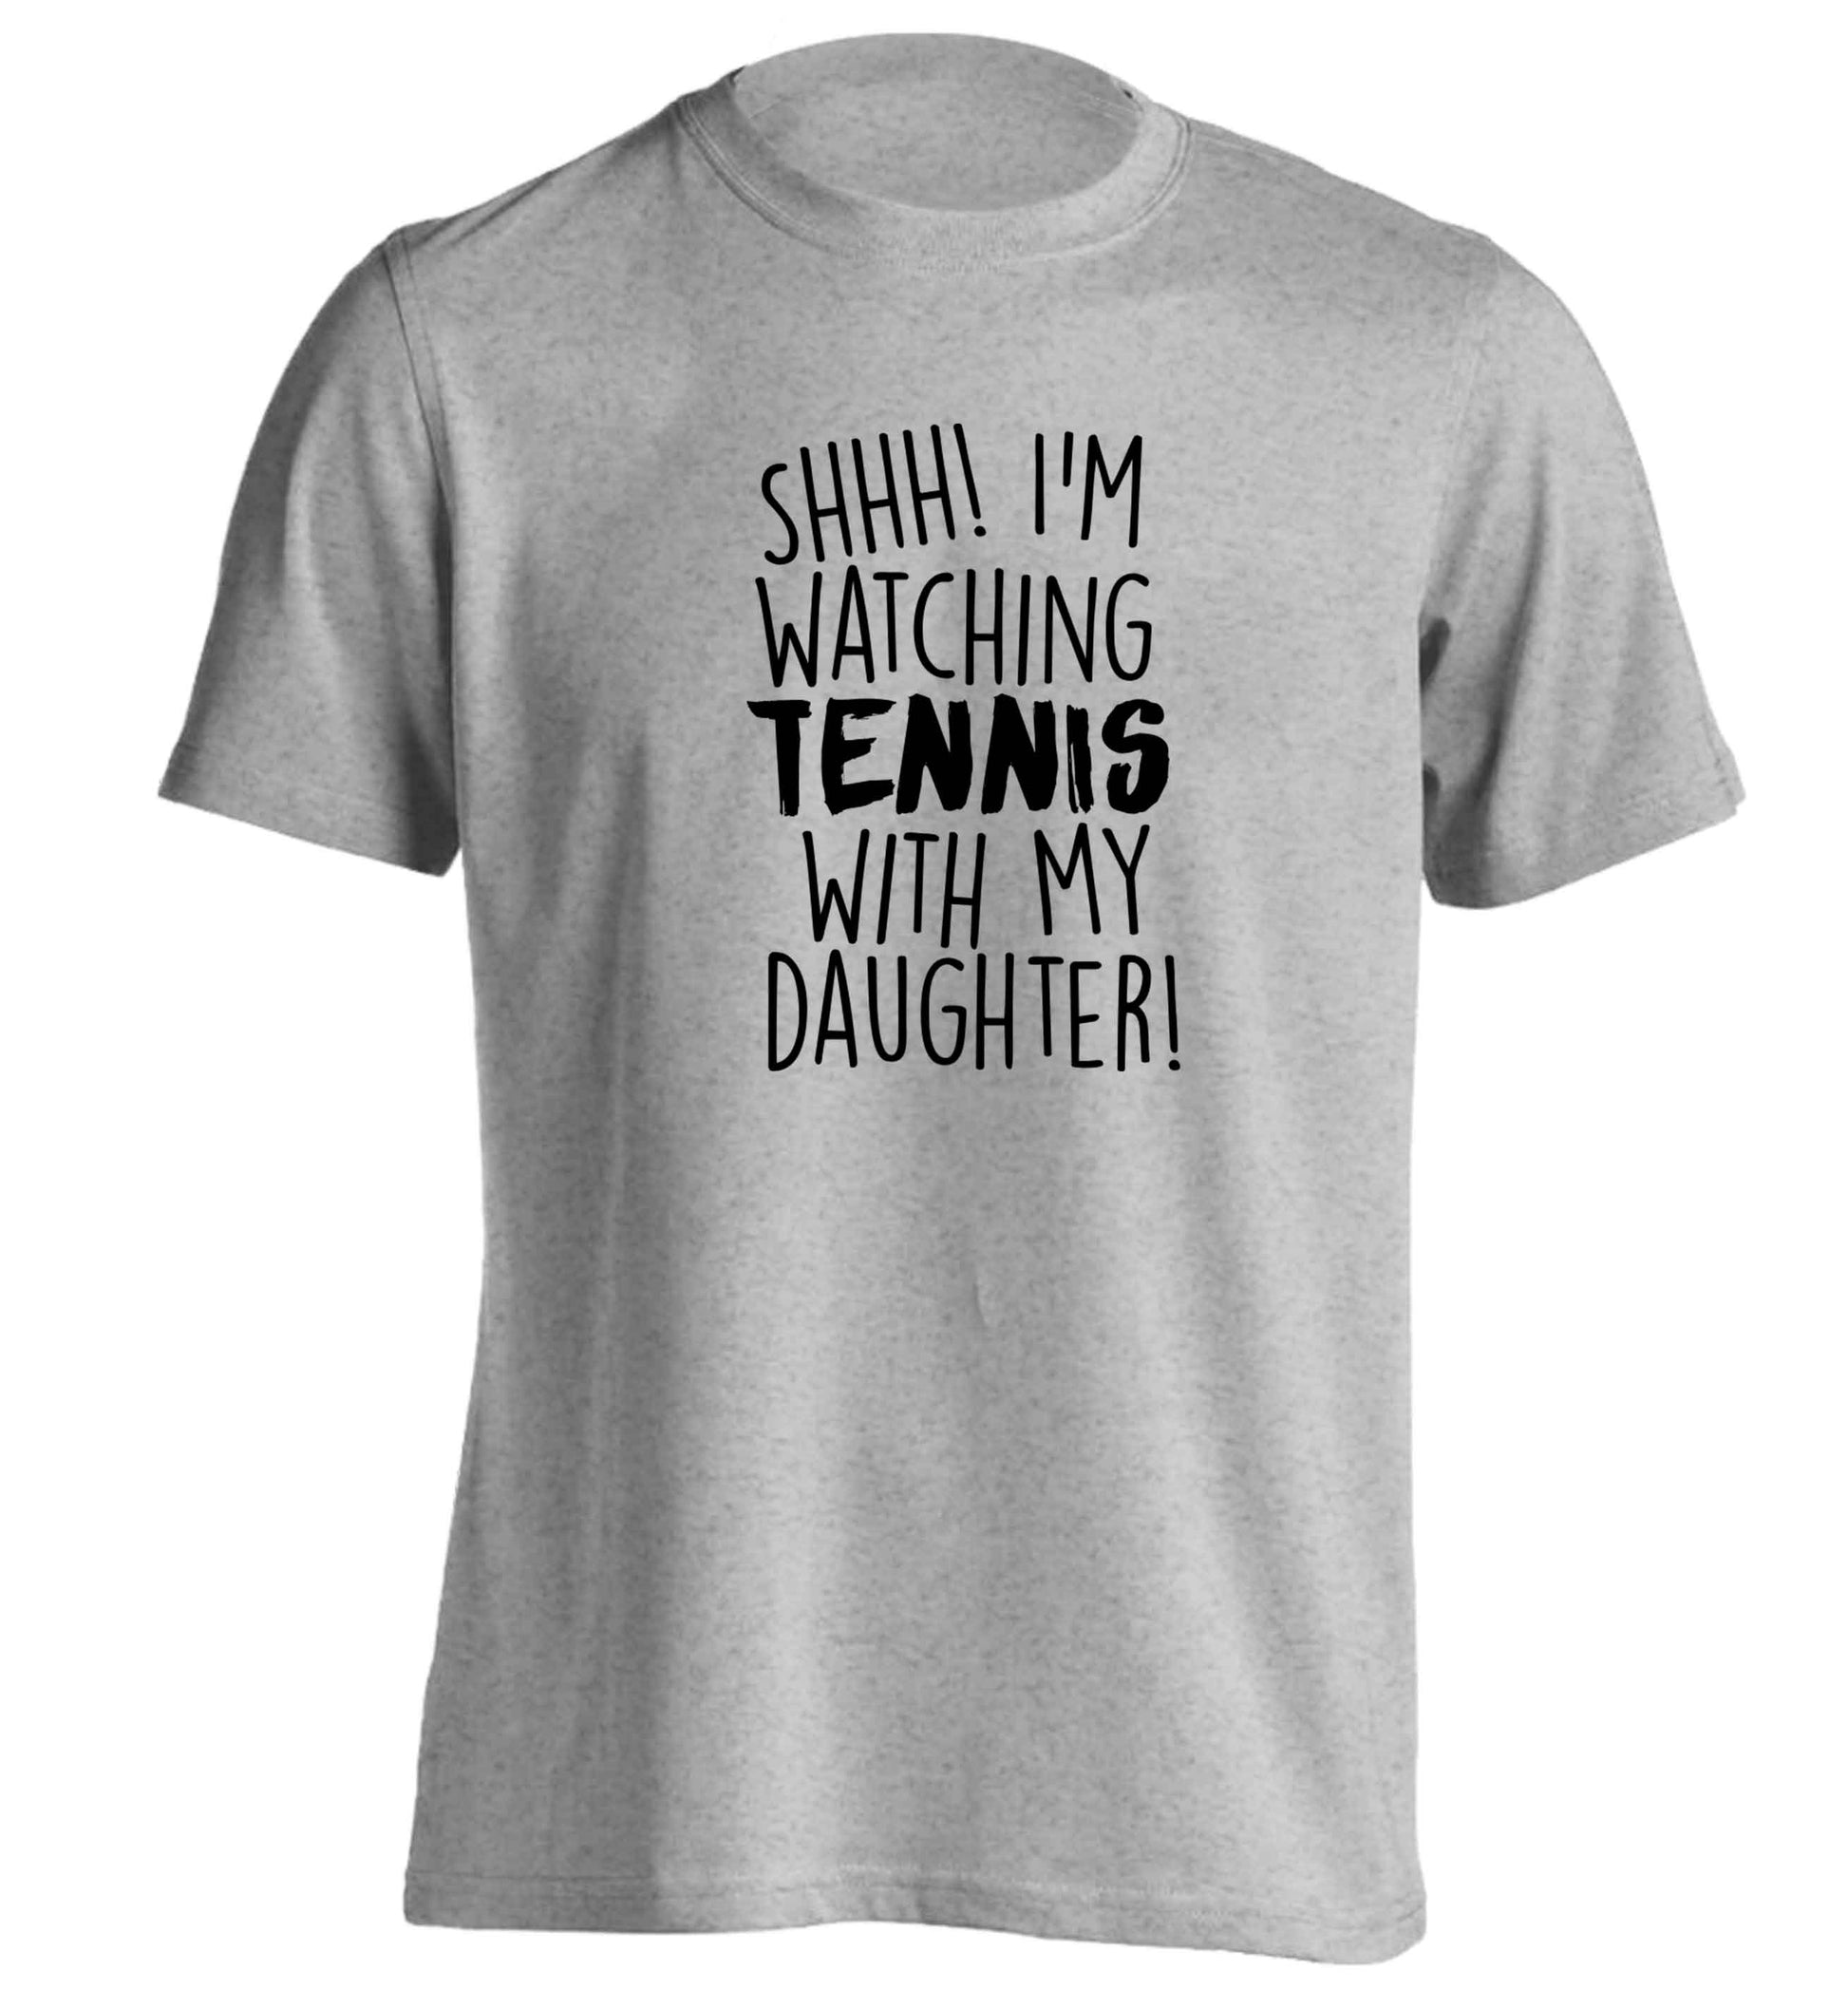 Shh! I'm watching tennis with my daughter! adults unisex grey Tshirt 2XL